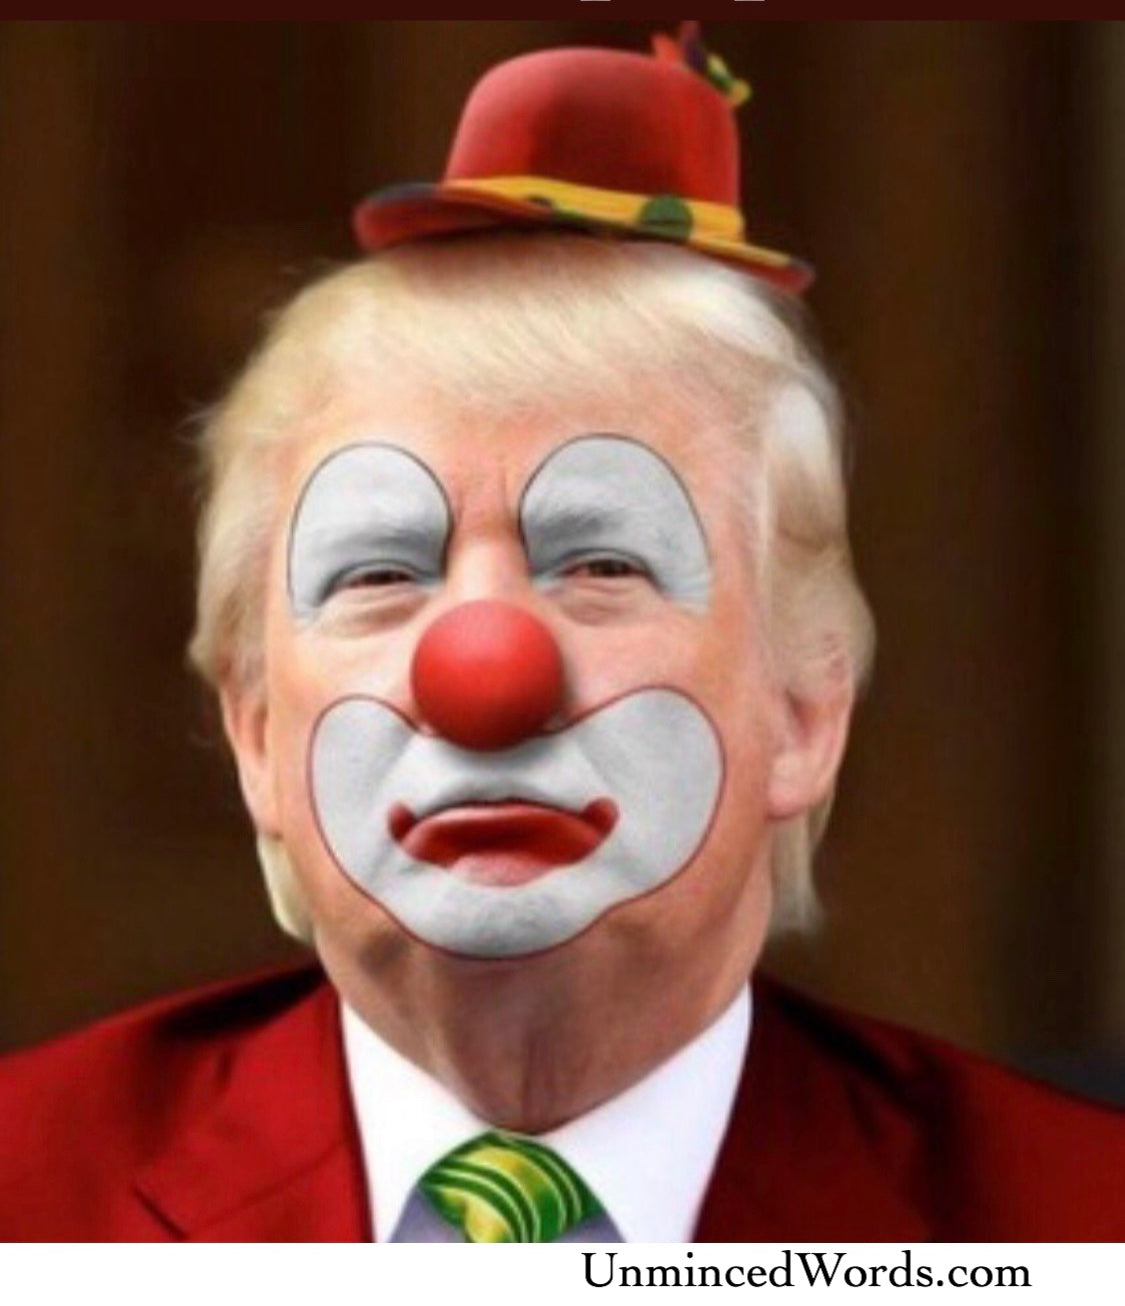 Clown Trump art shared by UnMinced Words